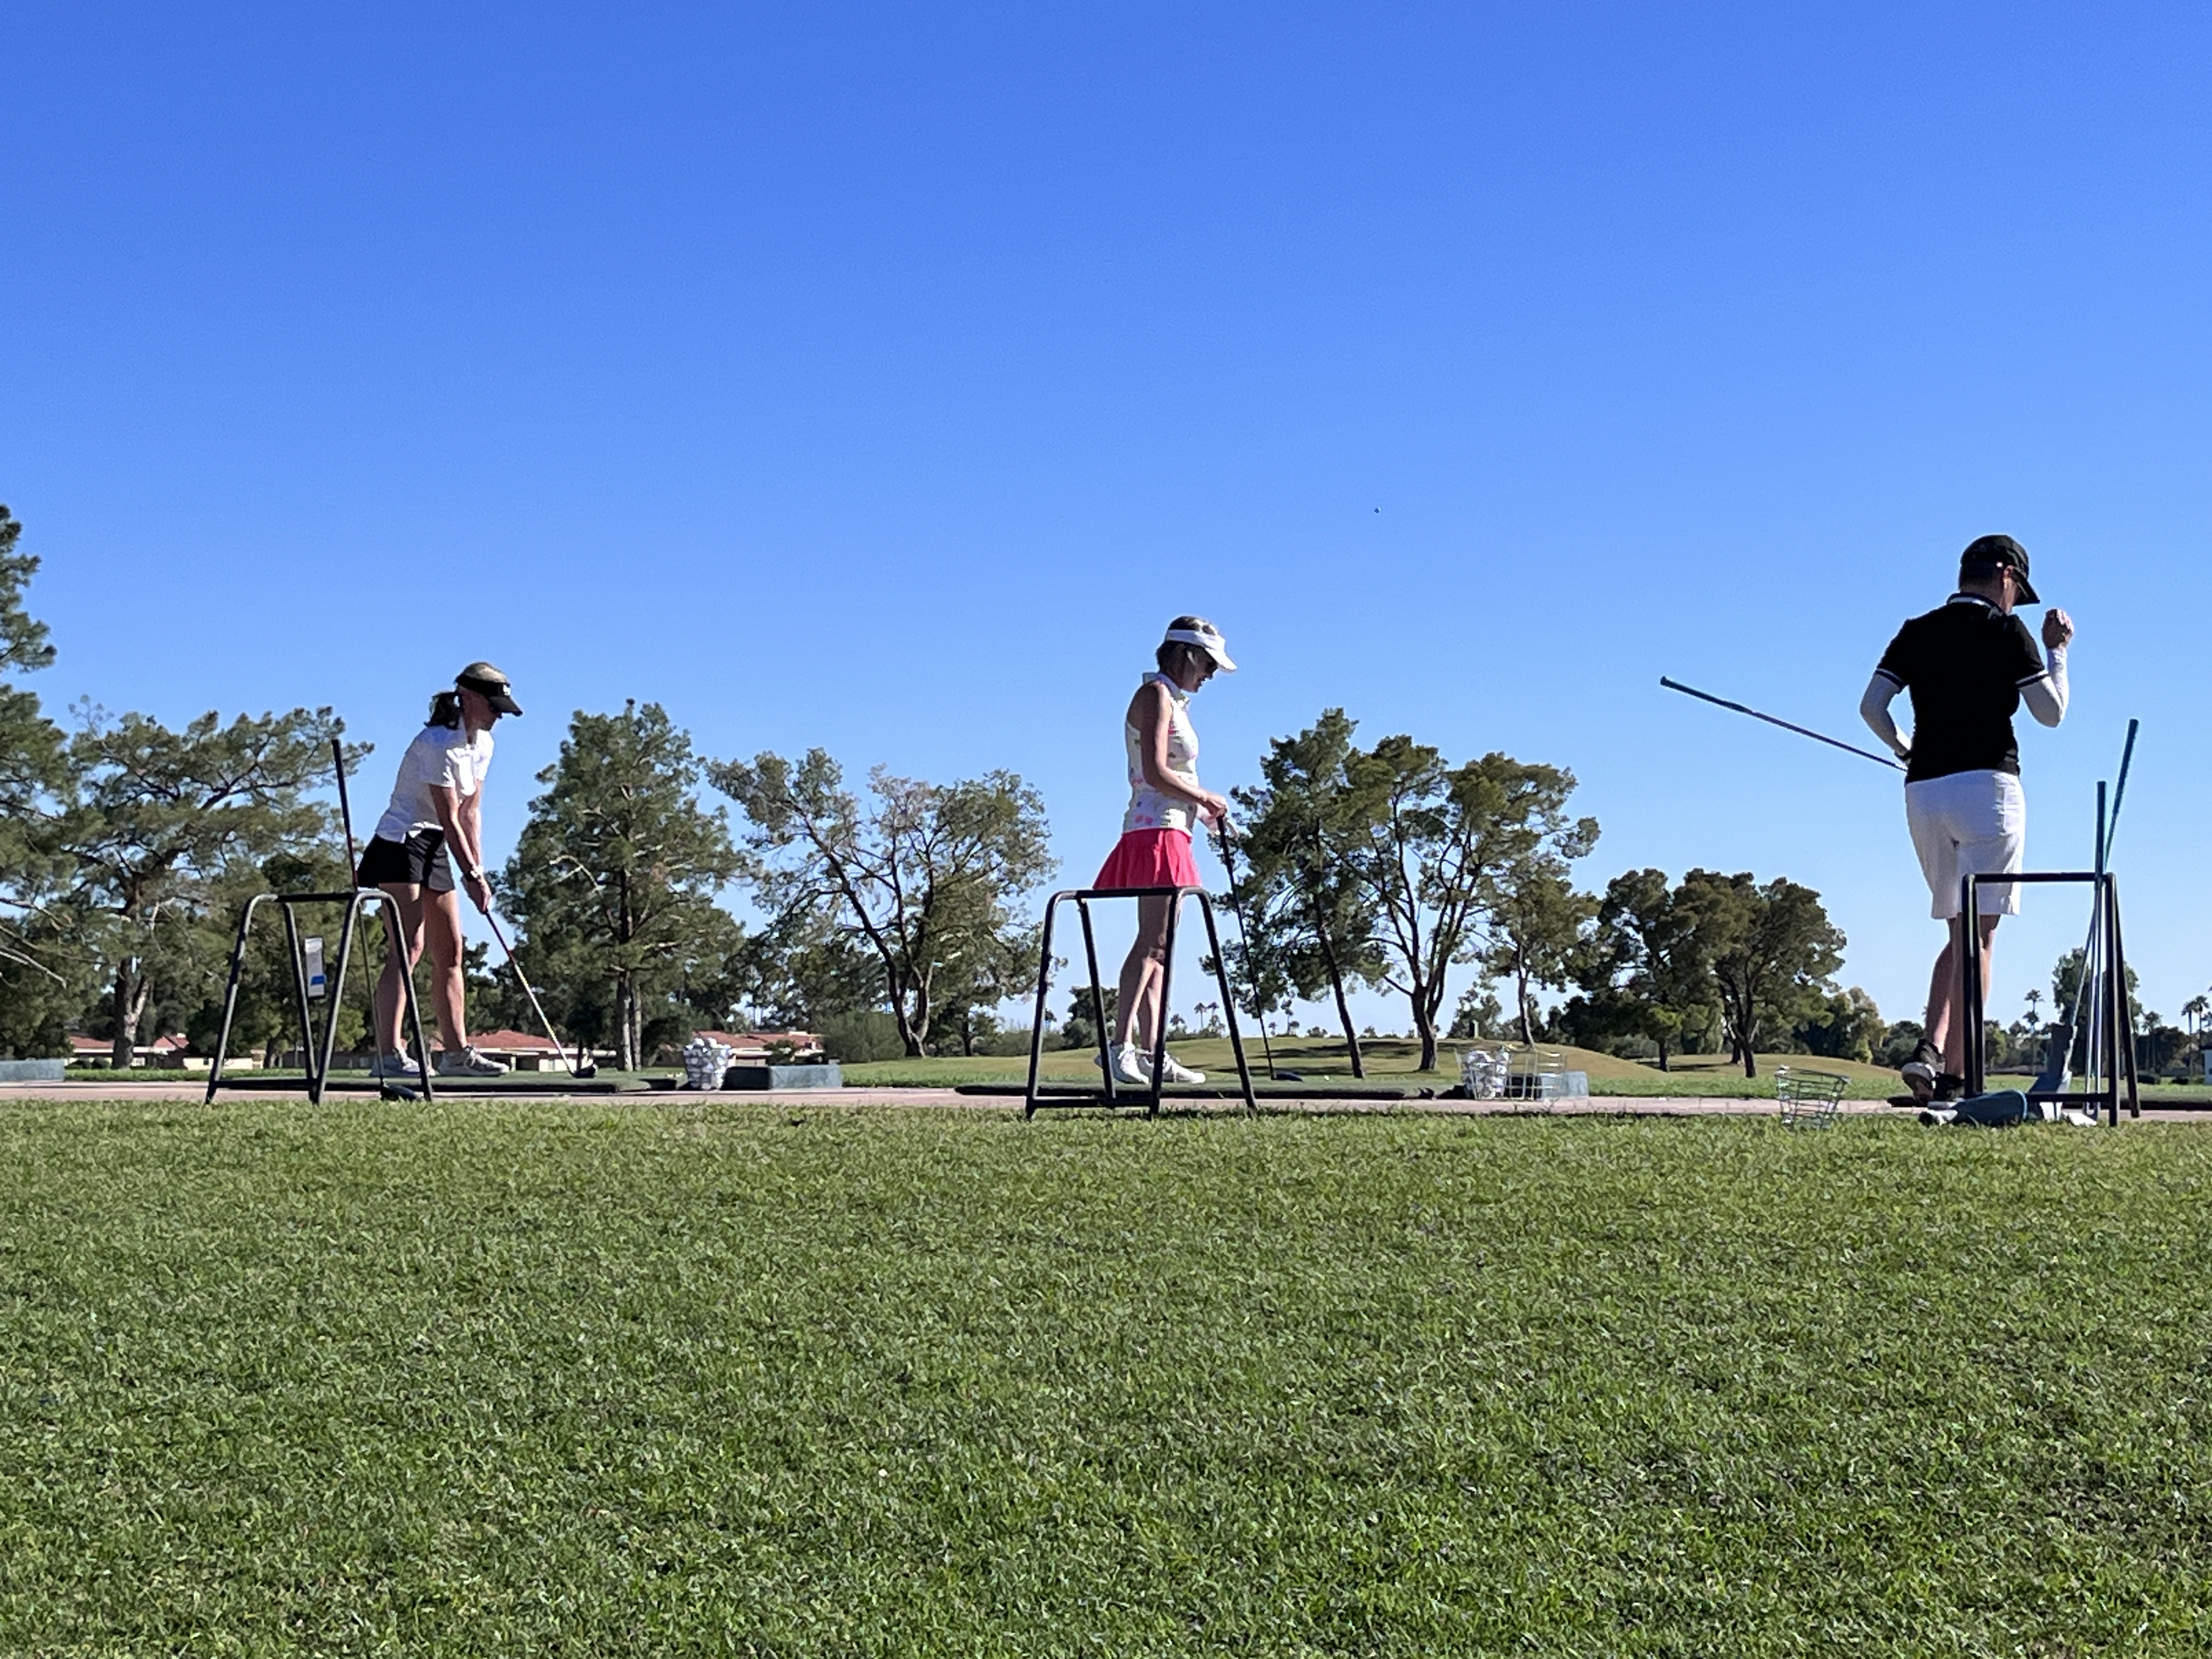 Members of the League Warming Up on the Range